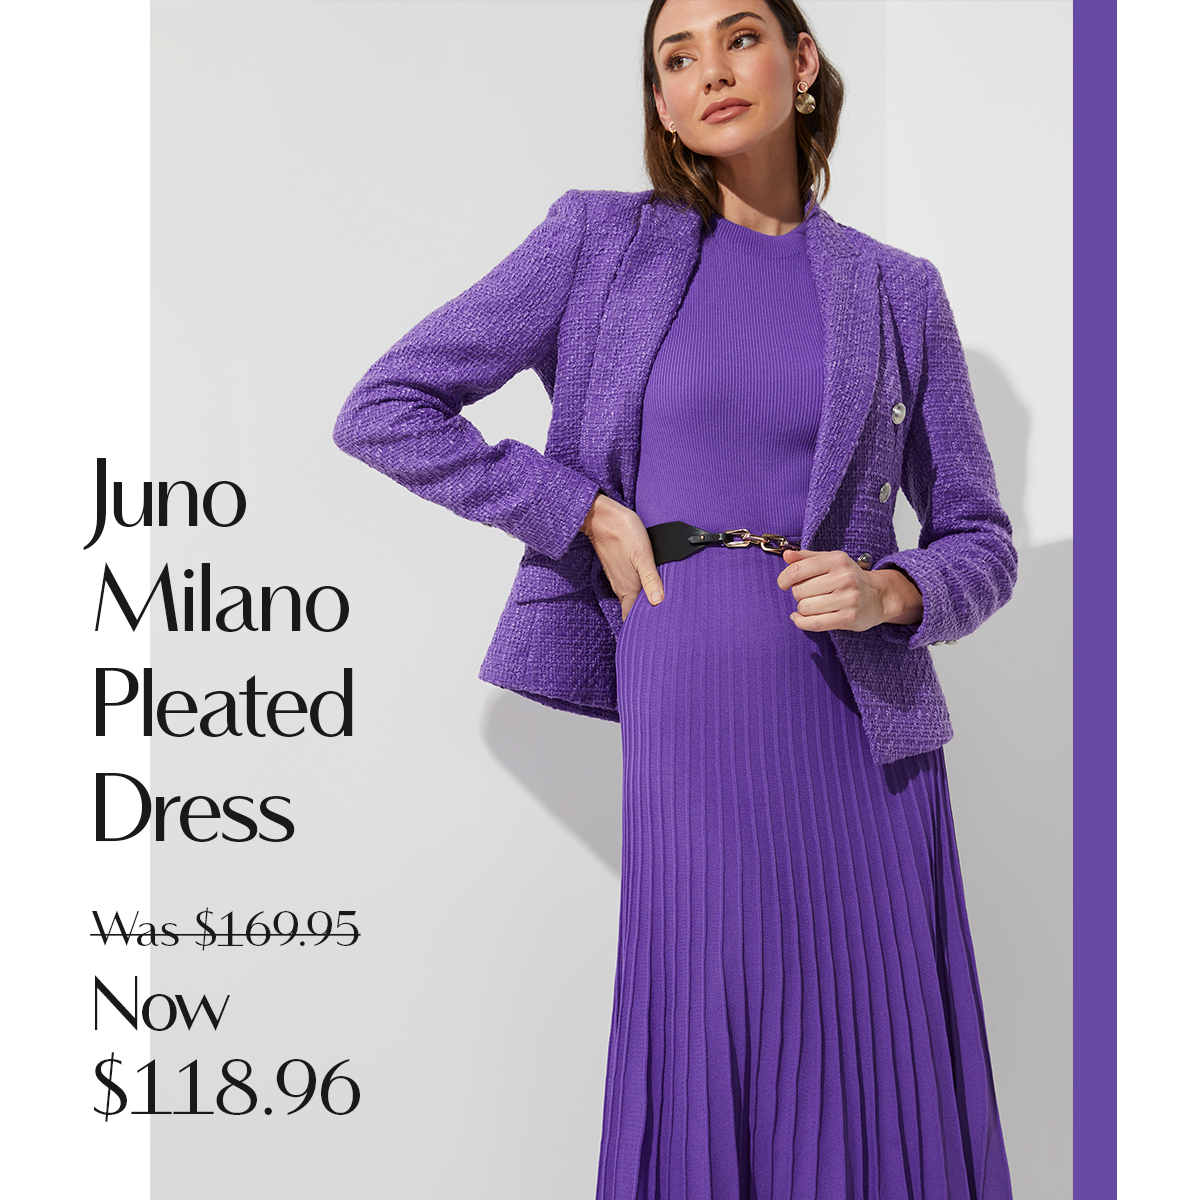 Juno Milano Pleated Dress Was $169.95 Now $118.96